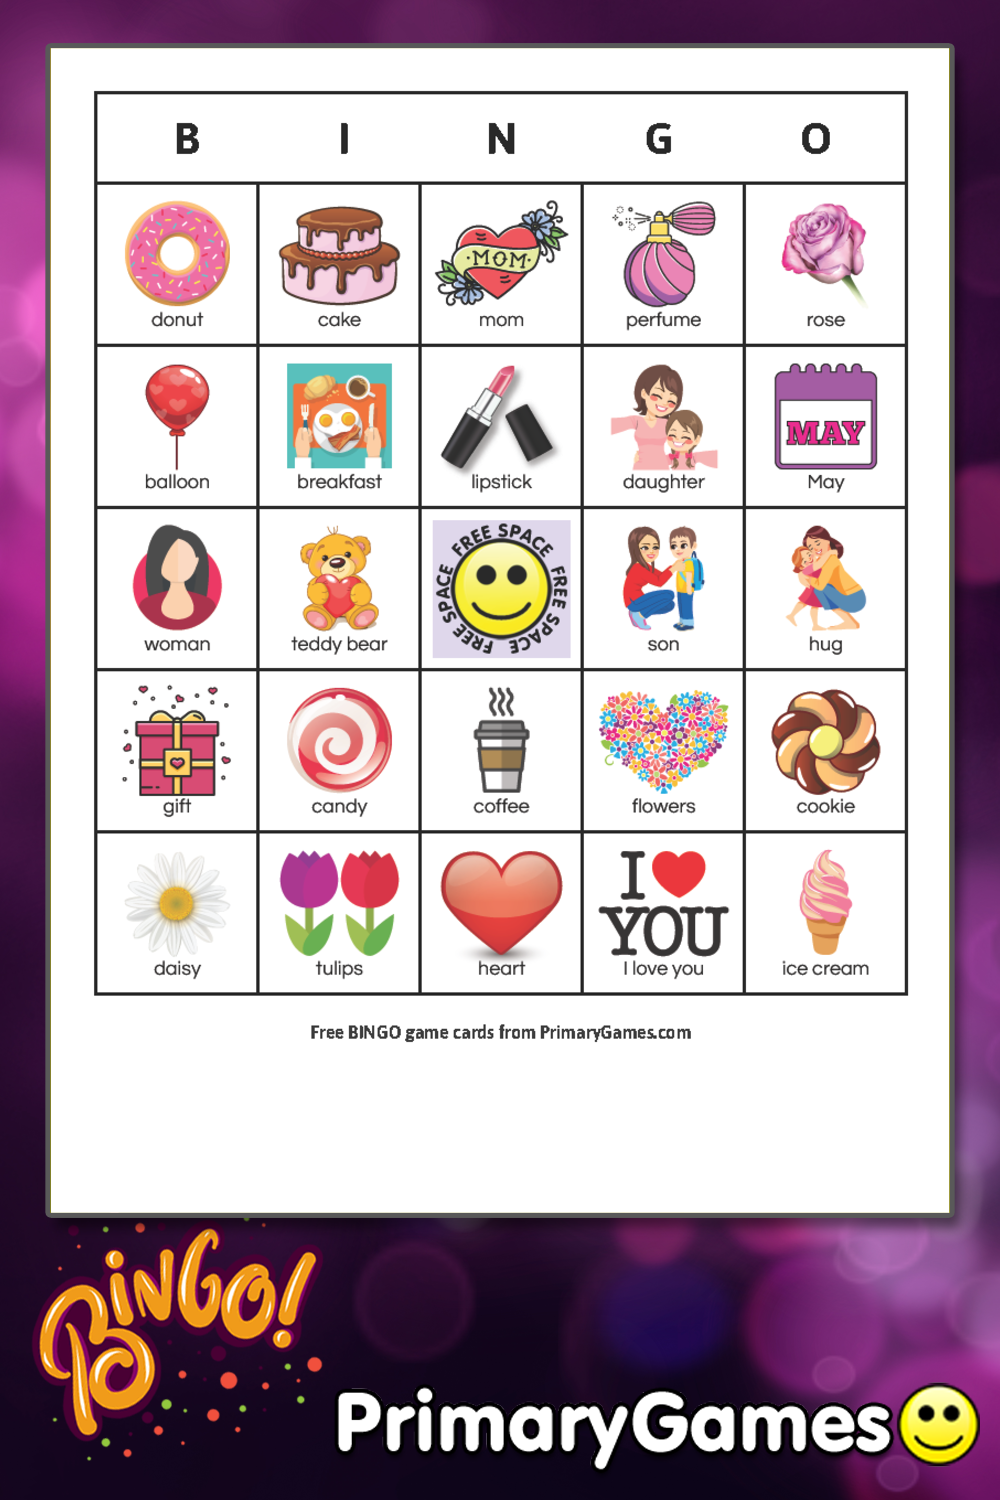 Mother's Day BINGO Game Card • FREE Printable Game from PrimaryGames